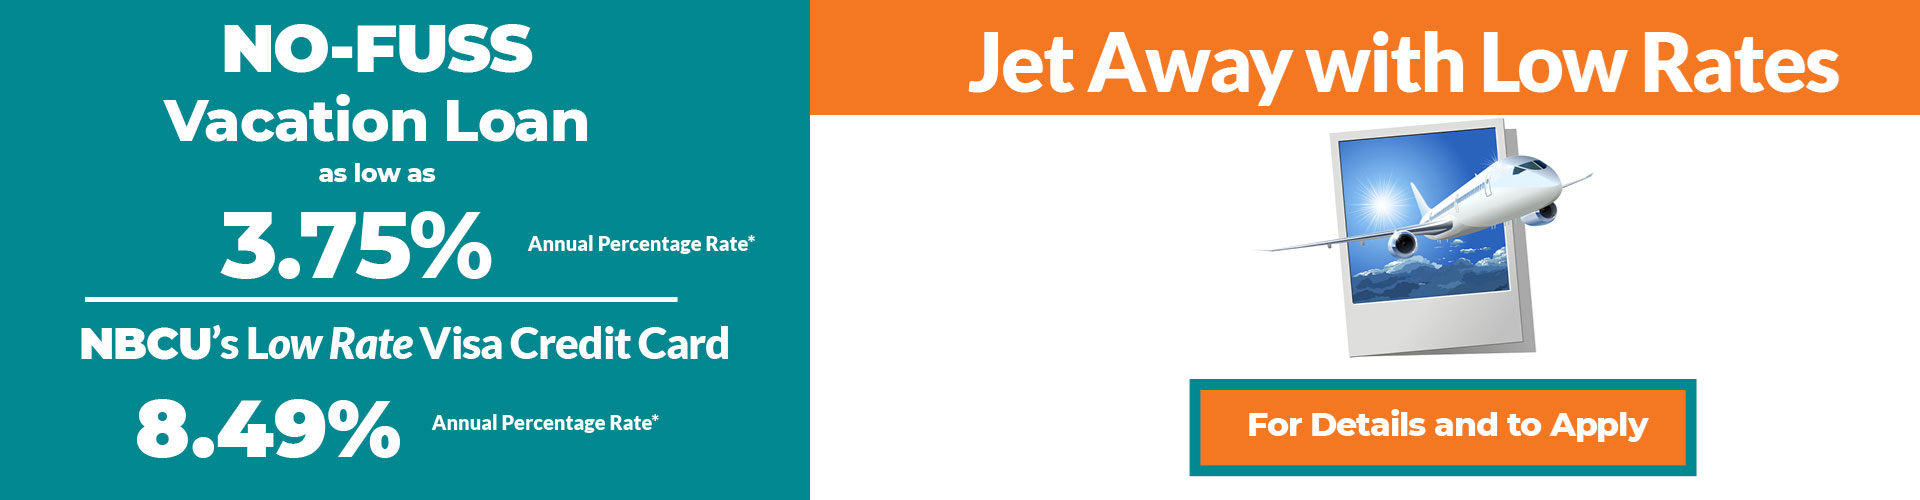 Jet Away with Low Rates